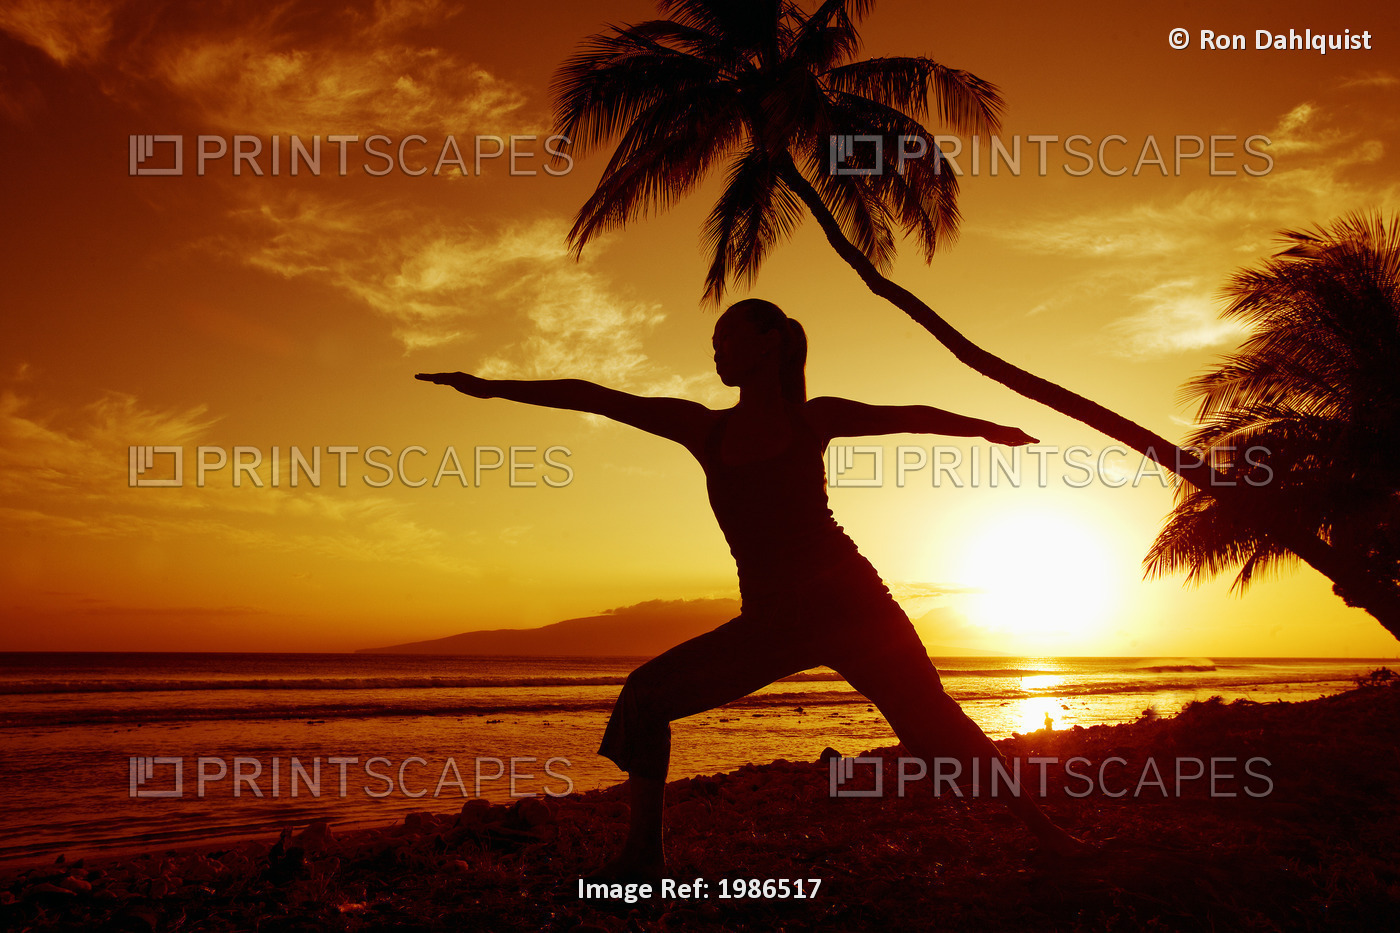 Hawaii, Maui, Olowalu, Woman Doing Yoga By The Ocean At Sunset Under Palm Tree.